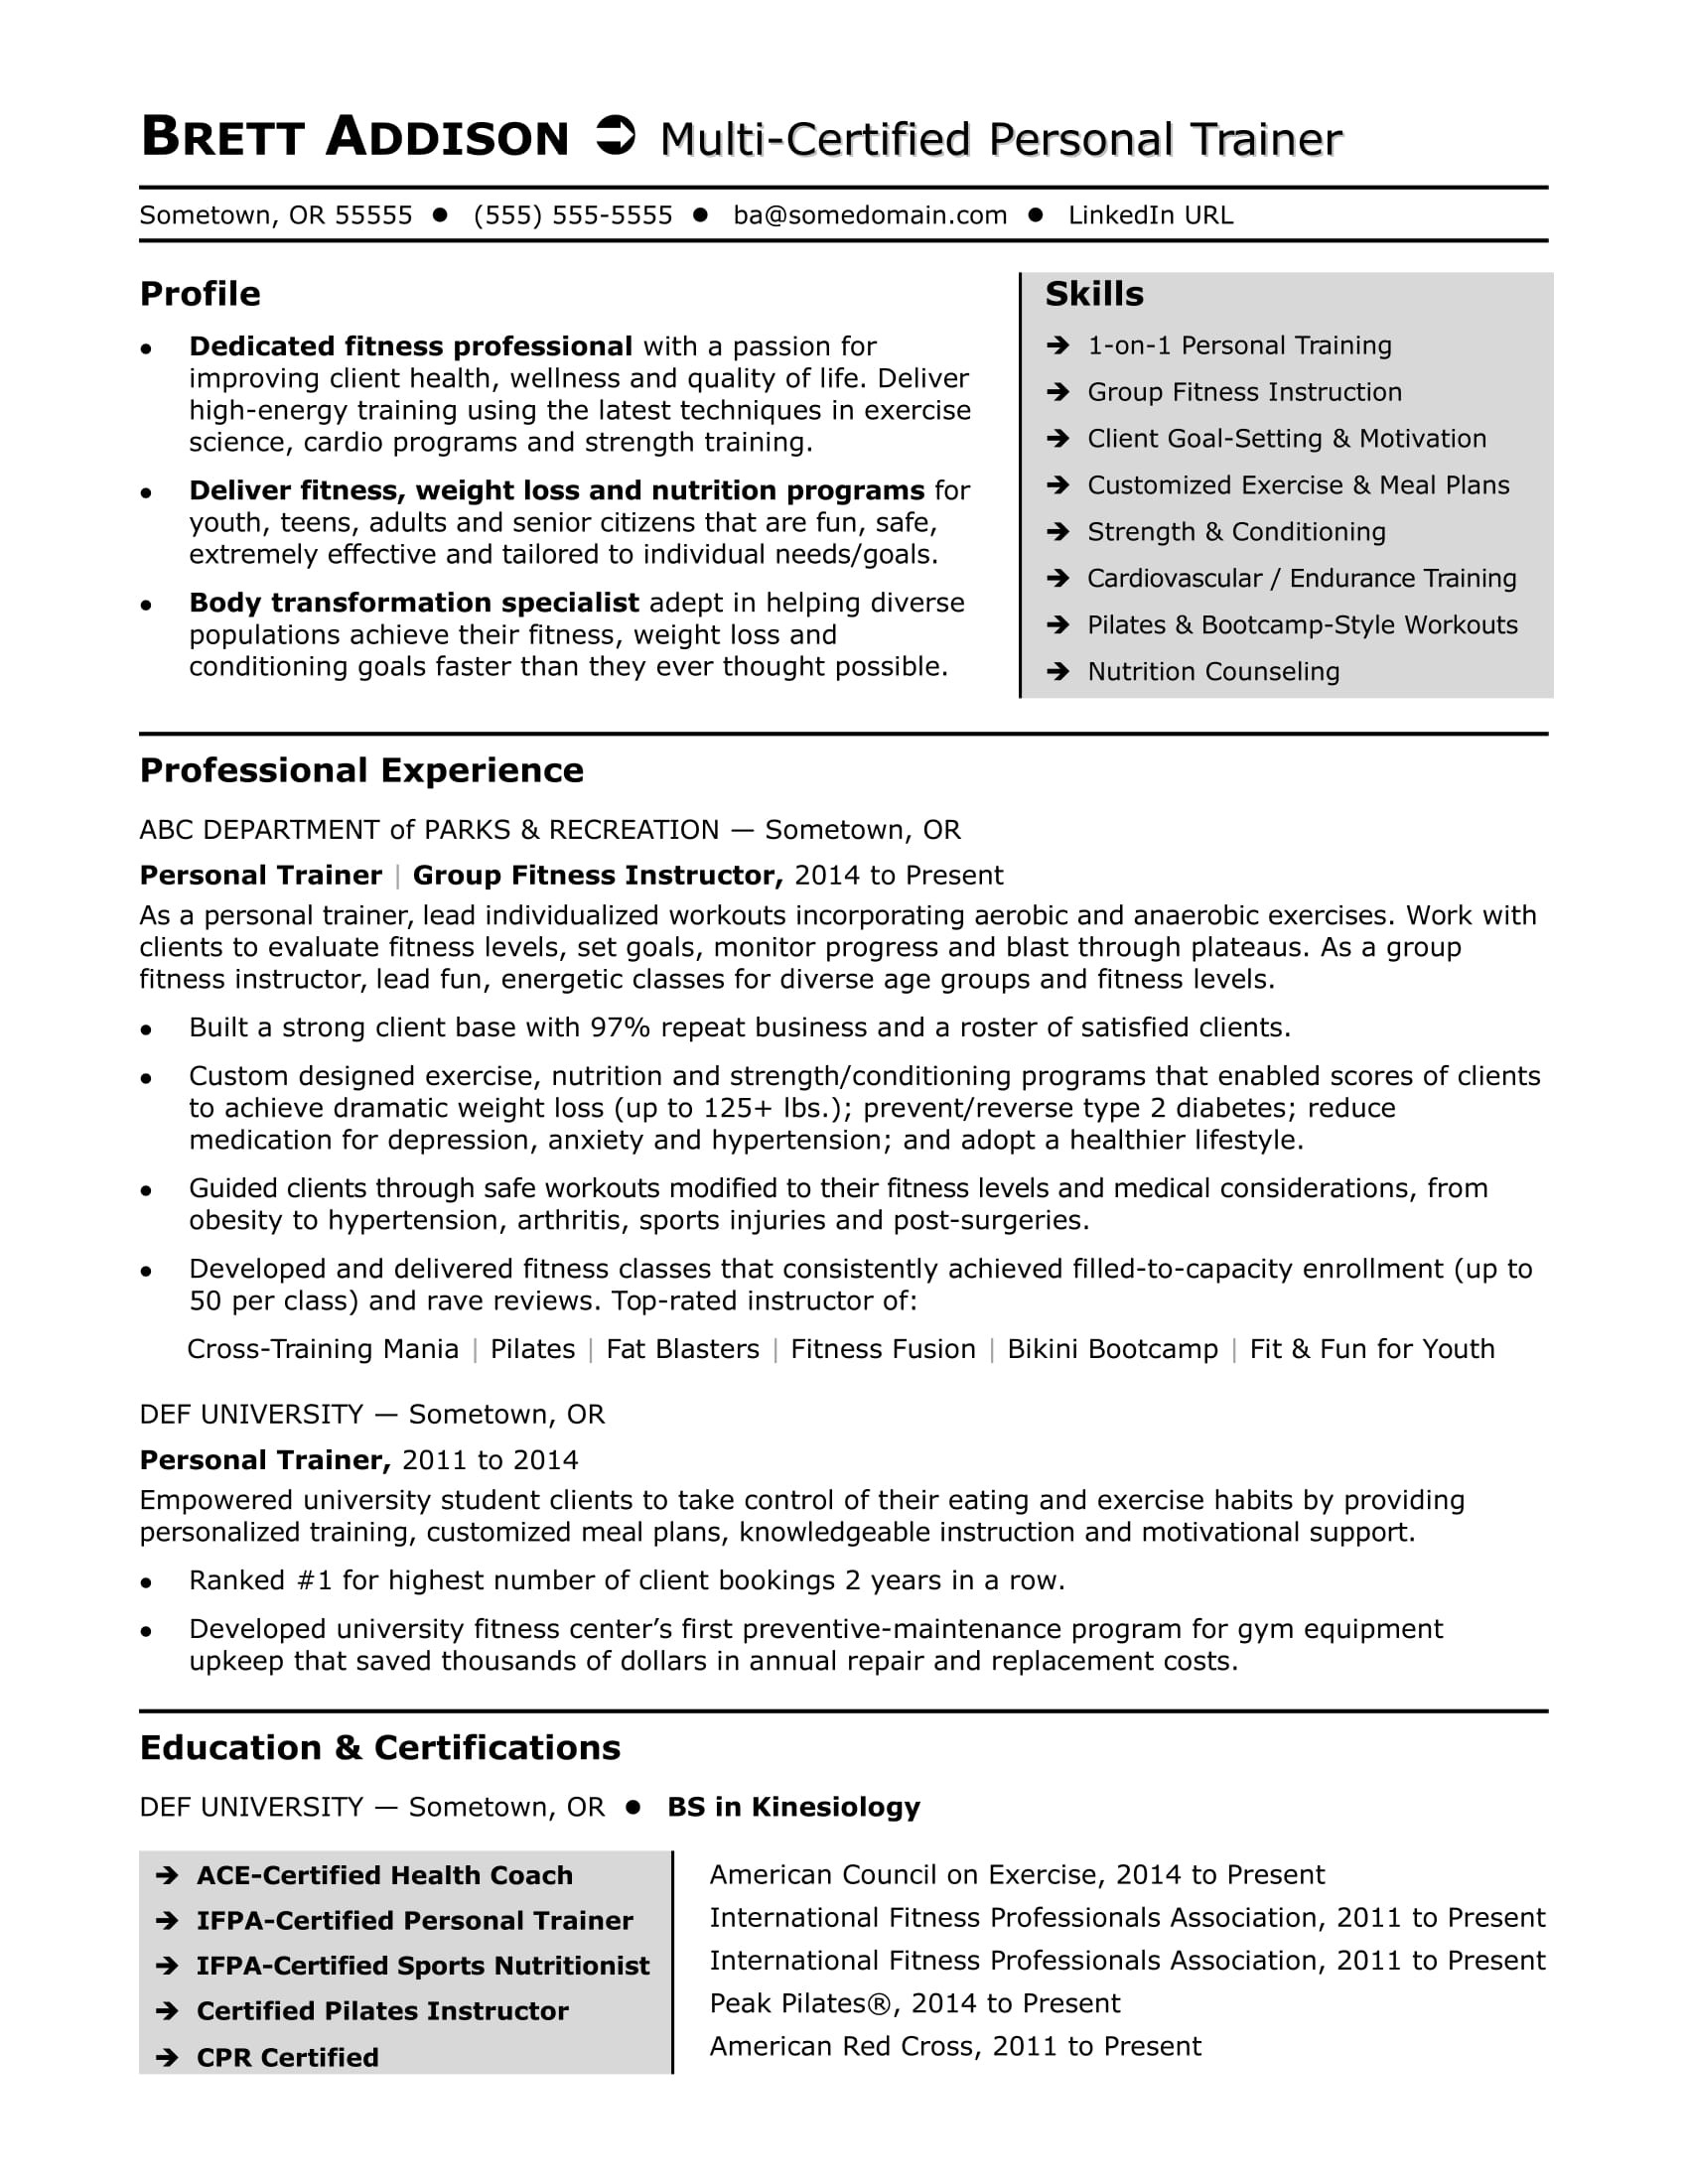 Sample Resume Of Health and Wellness Coach Personal Trainer Resume Sample Monster.com